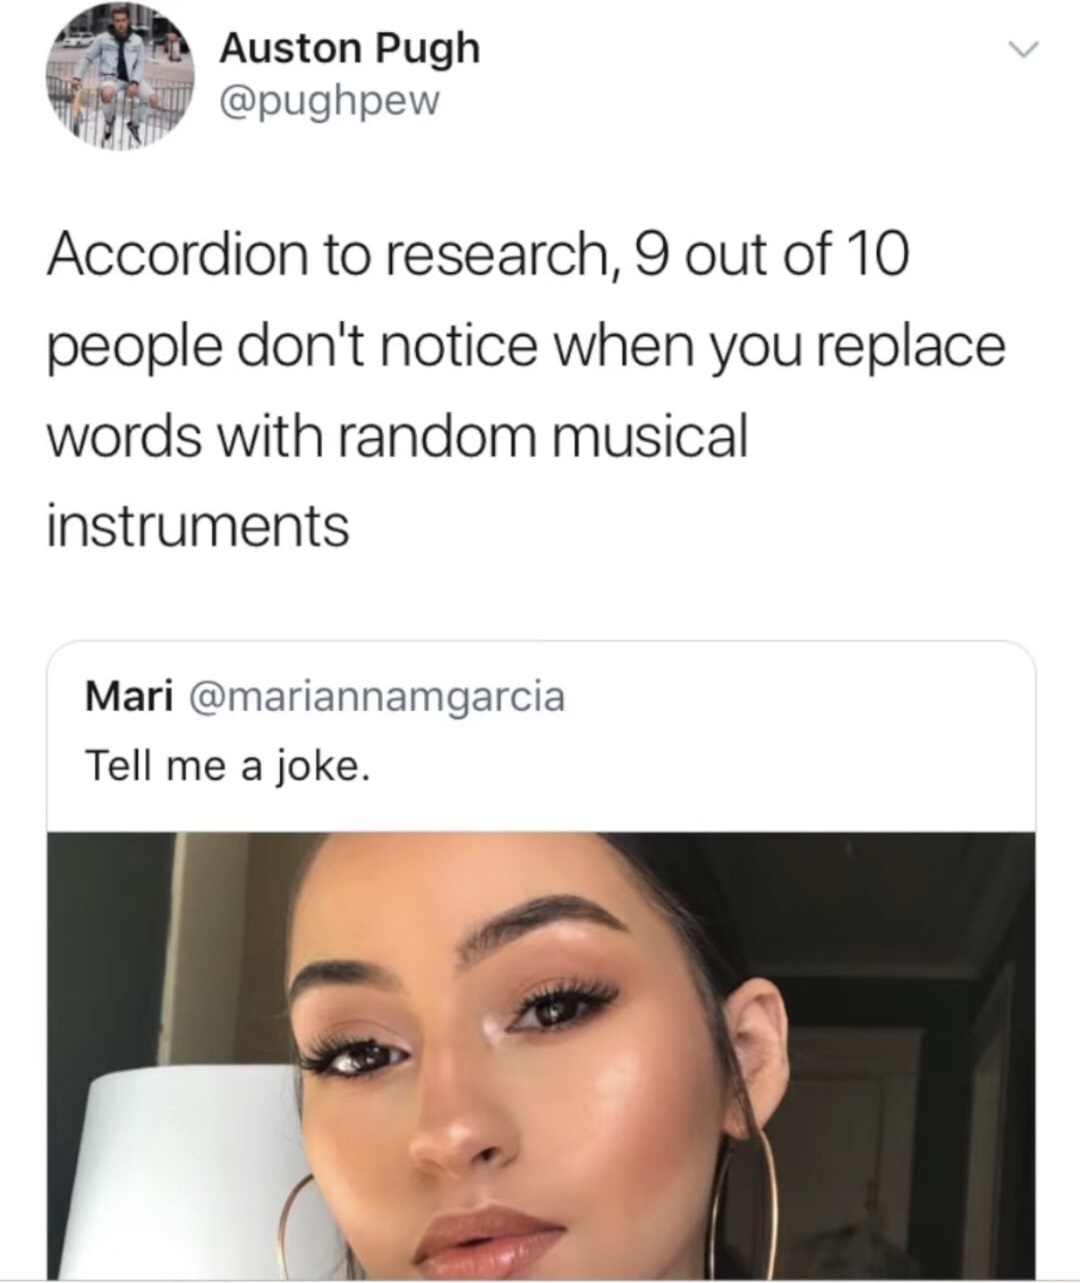 accordion to research meme - Auston Pugh Accordion to research, 9 out of 10 people don't notice when you replace words with random musical instruments Mari Tell me a joke.